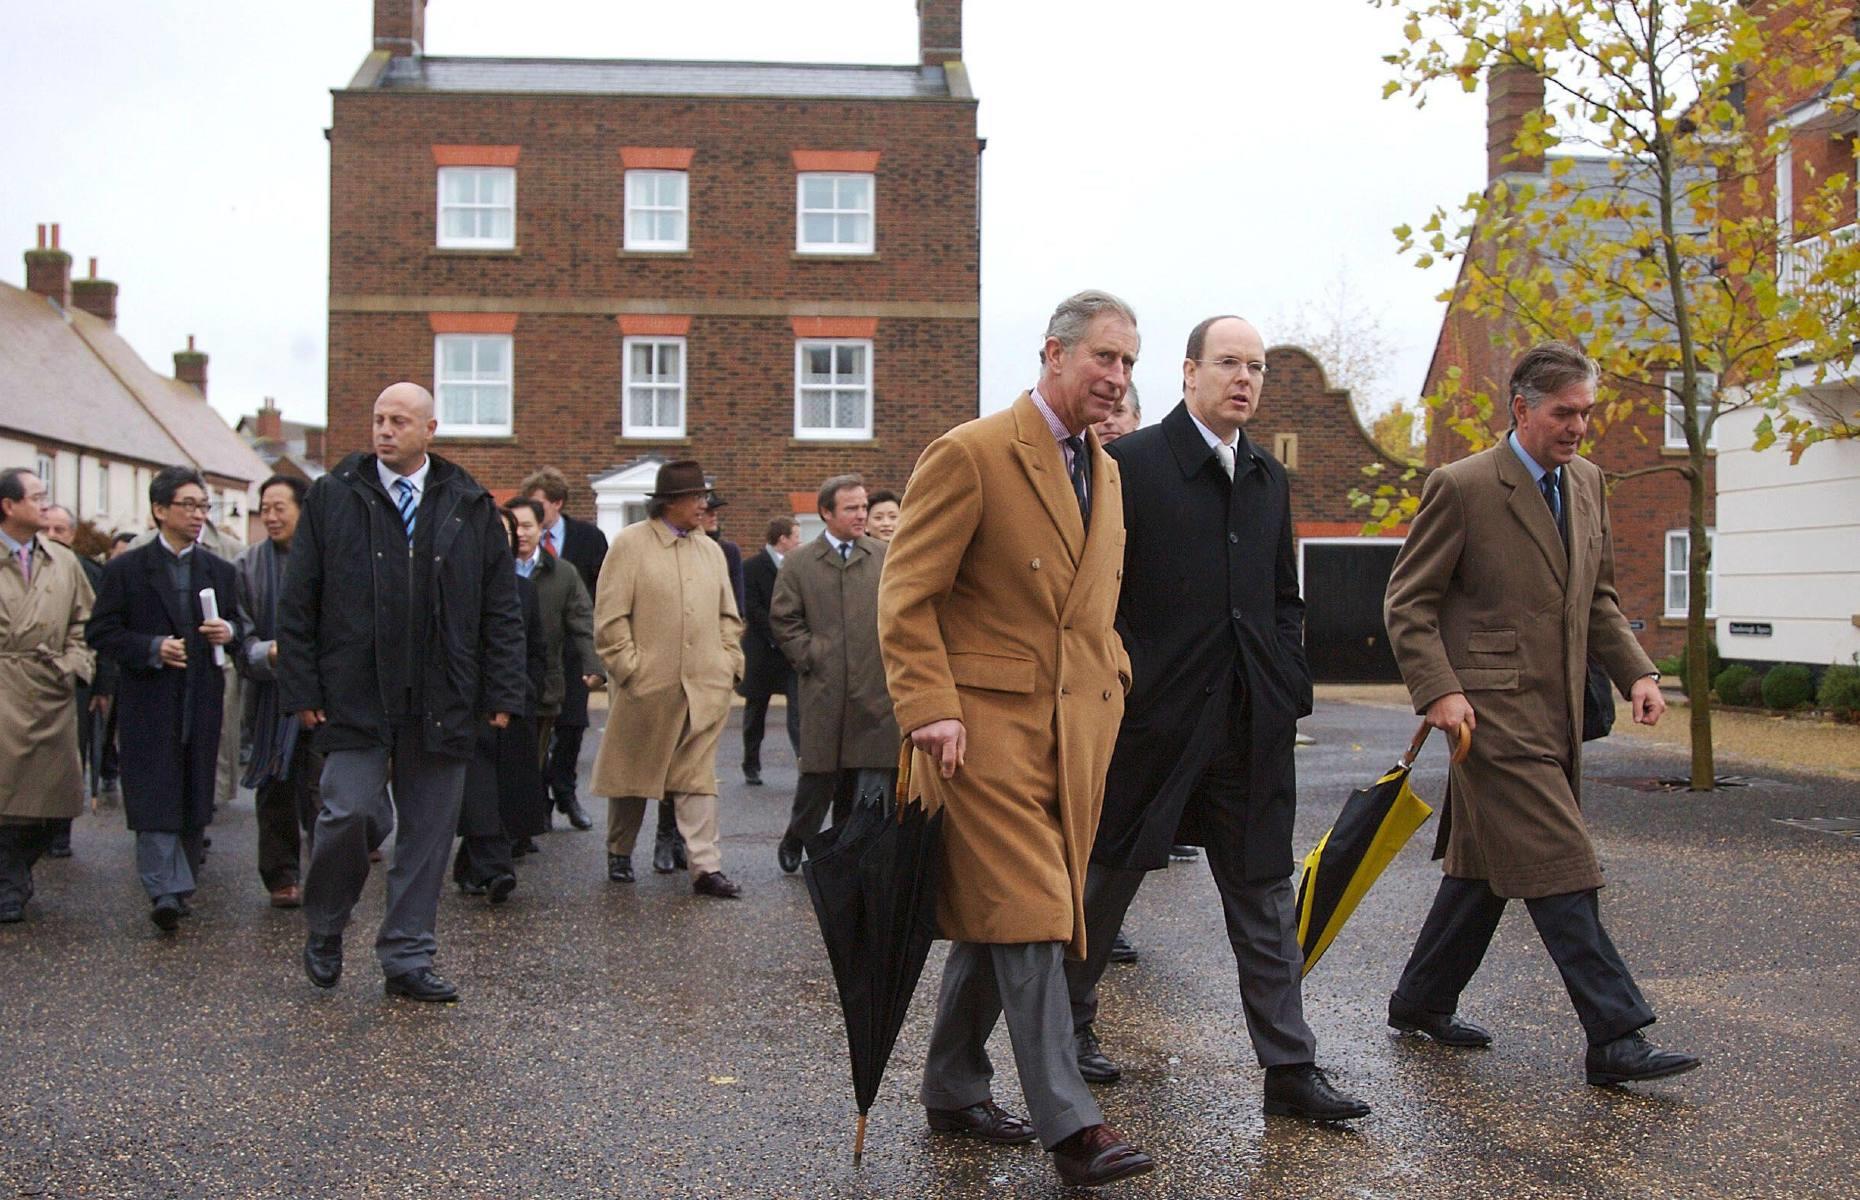 <p>The King is rightly proud of his achievements in Poundbury, which have attracted the attention of architects and town planners the world over, including dignitaries like Prince Albert of Monaco, seen here in 2006. According to the Duchy of Cornwall, a 2018 report concluded that the town is already contributing over £98 million ($123m) to the local economy, while its principles have been incorporated into the British Government’s Planning Policy and replicated across the country reports <em><a href="http://www.telegraph.co.uk/property/uk/poundbury-town-king-charles-iii-built/">The Telegraph</a></em>.</p>